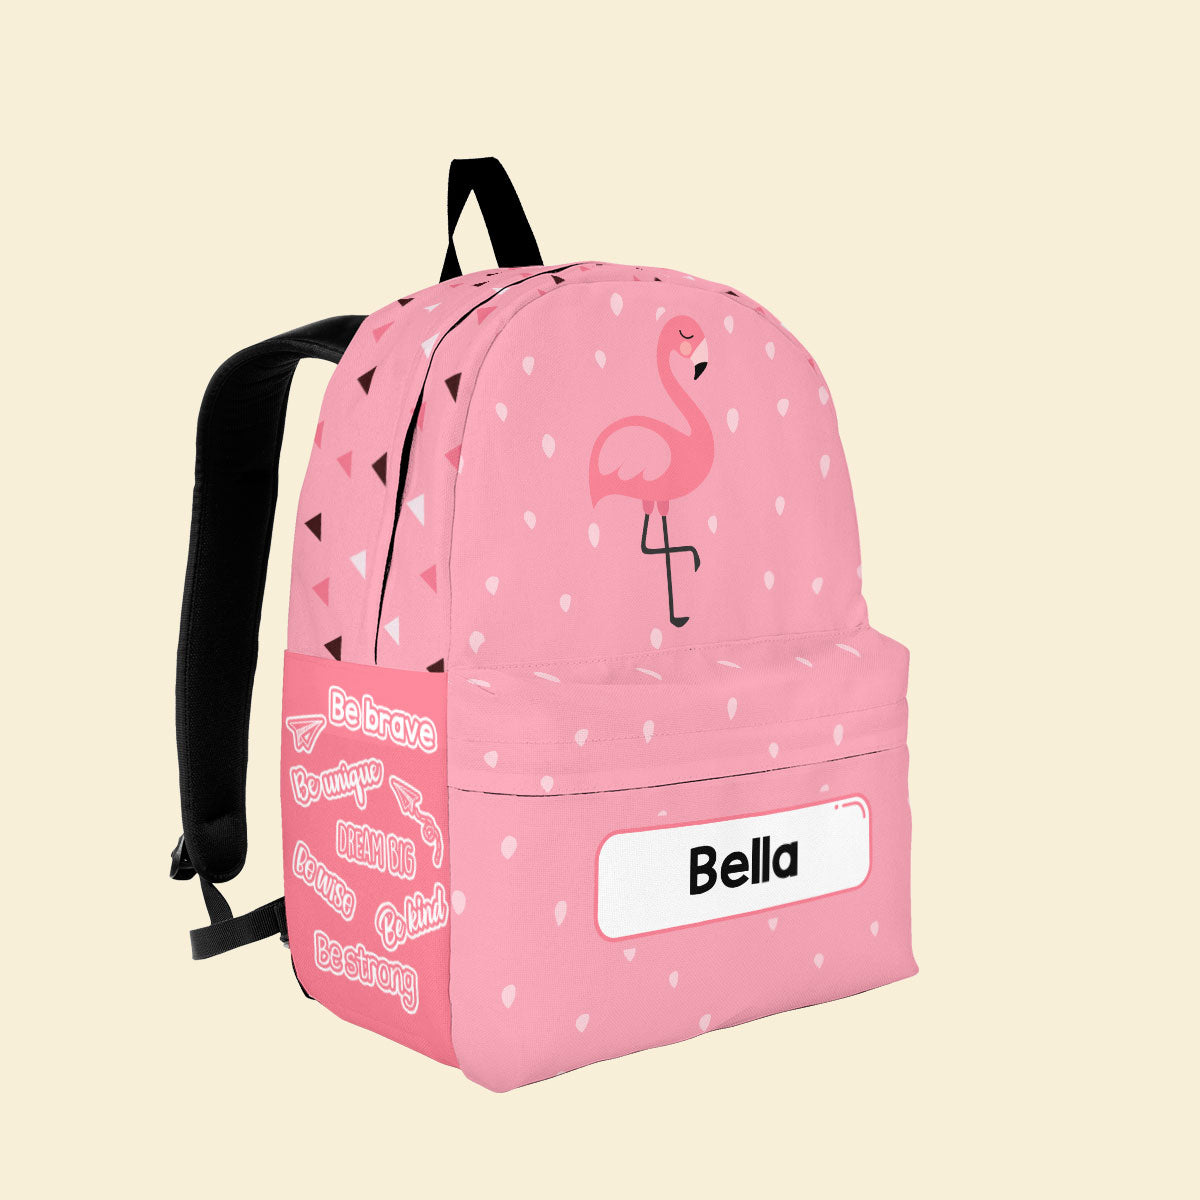 Be Unique Be Happy Be You - Personalized Backpack - Animal Version